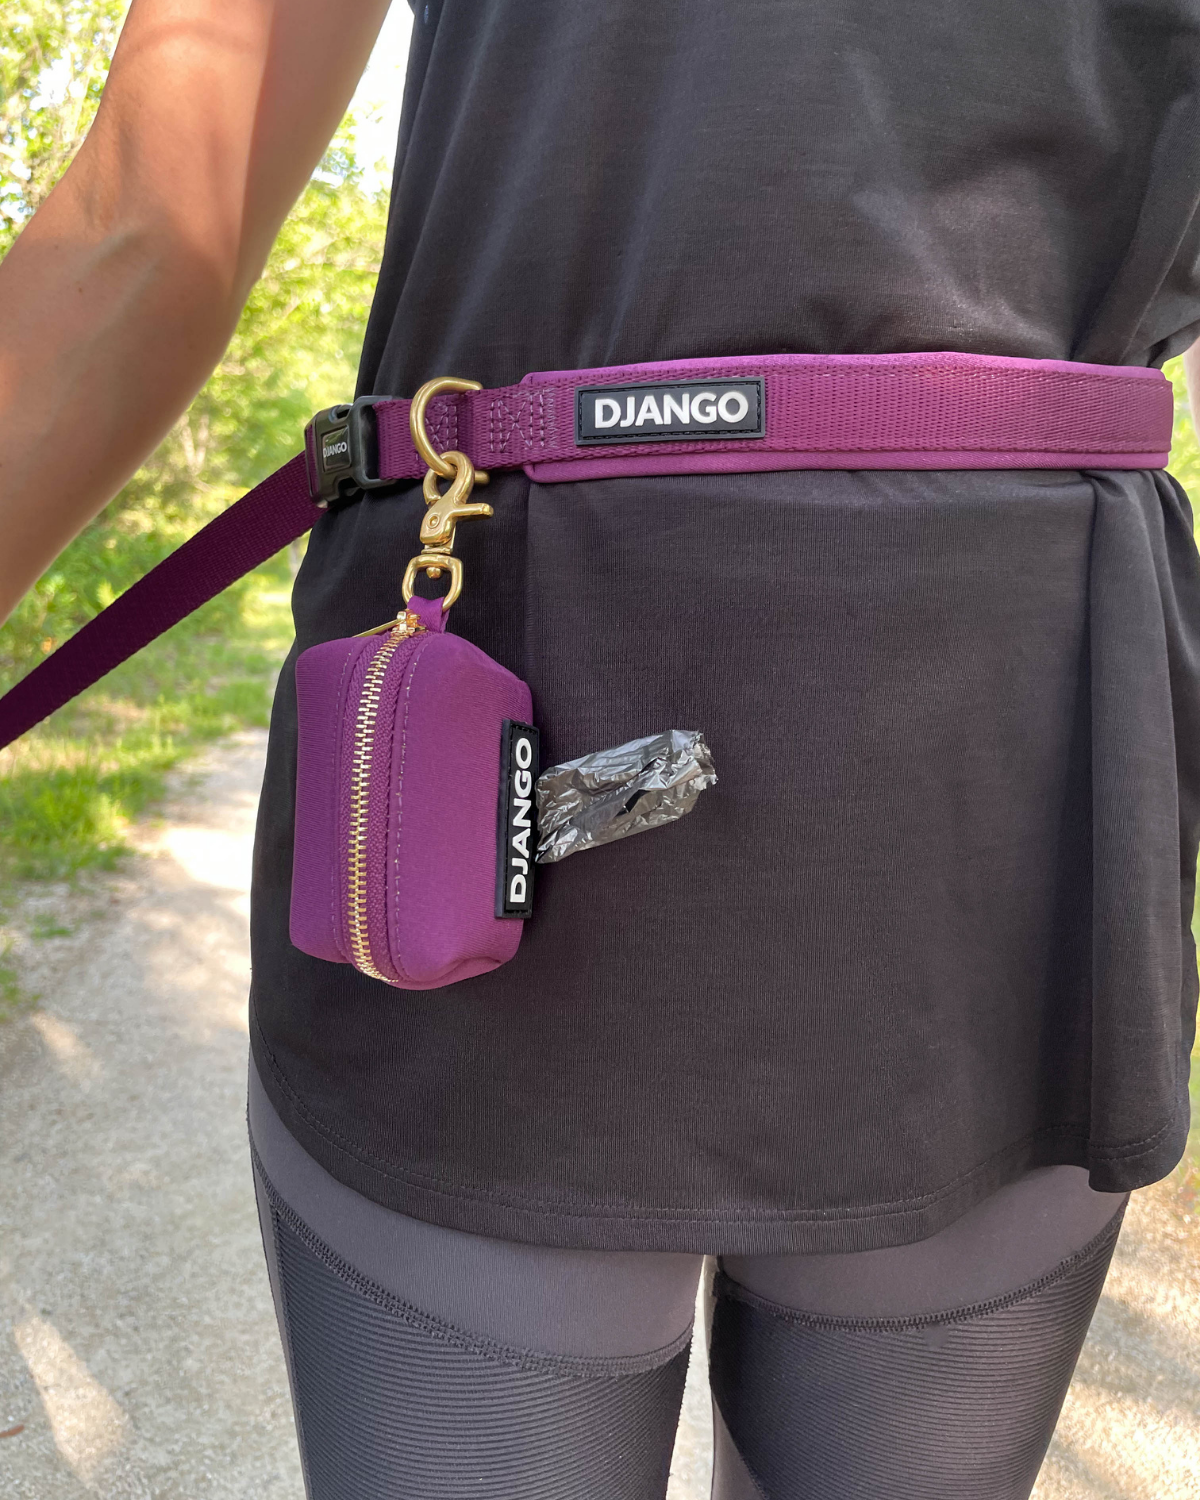 Use your DJANGO hands-free leash for around-the-waist wear and hands-free functionality. Attach your favorite waste bag holder to the solid cast brass D-ring - djangobrand.com